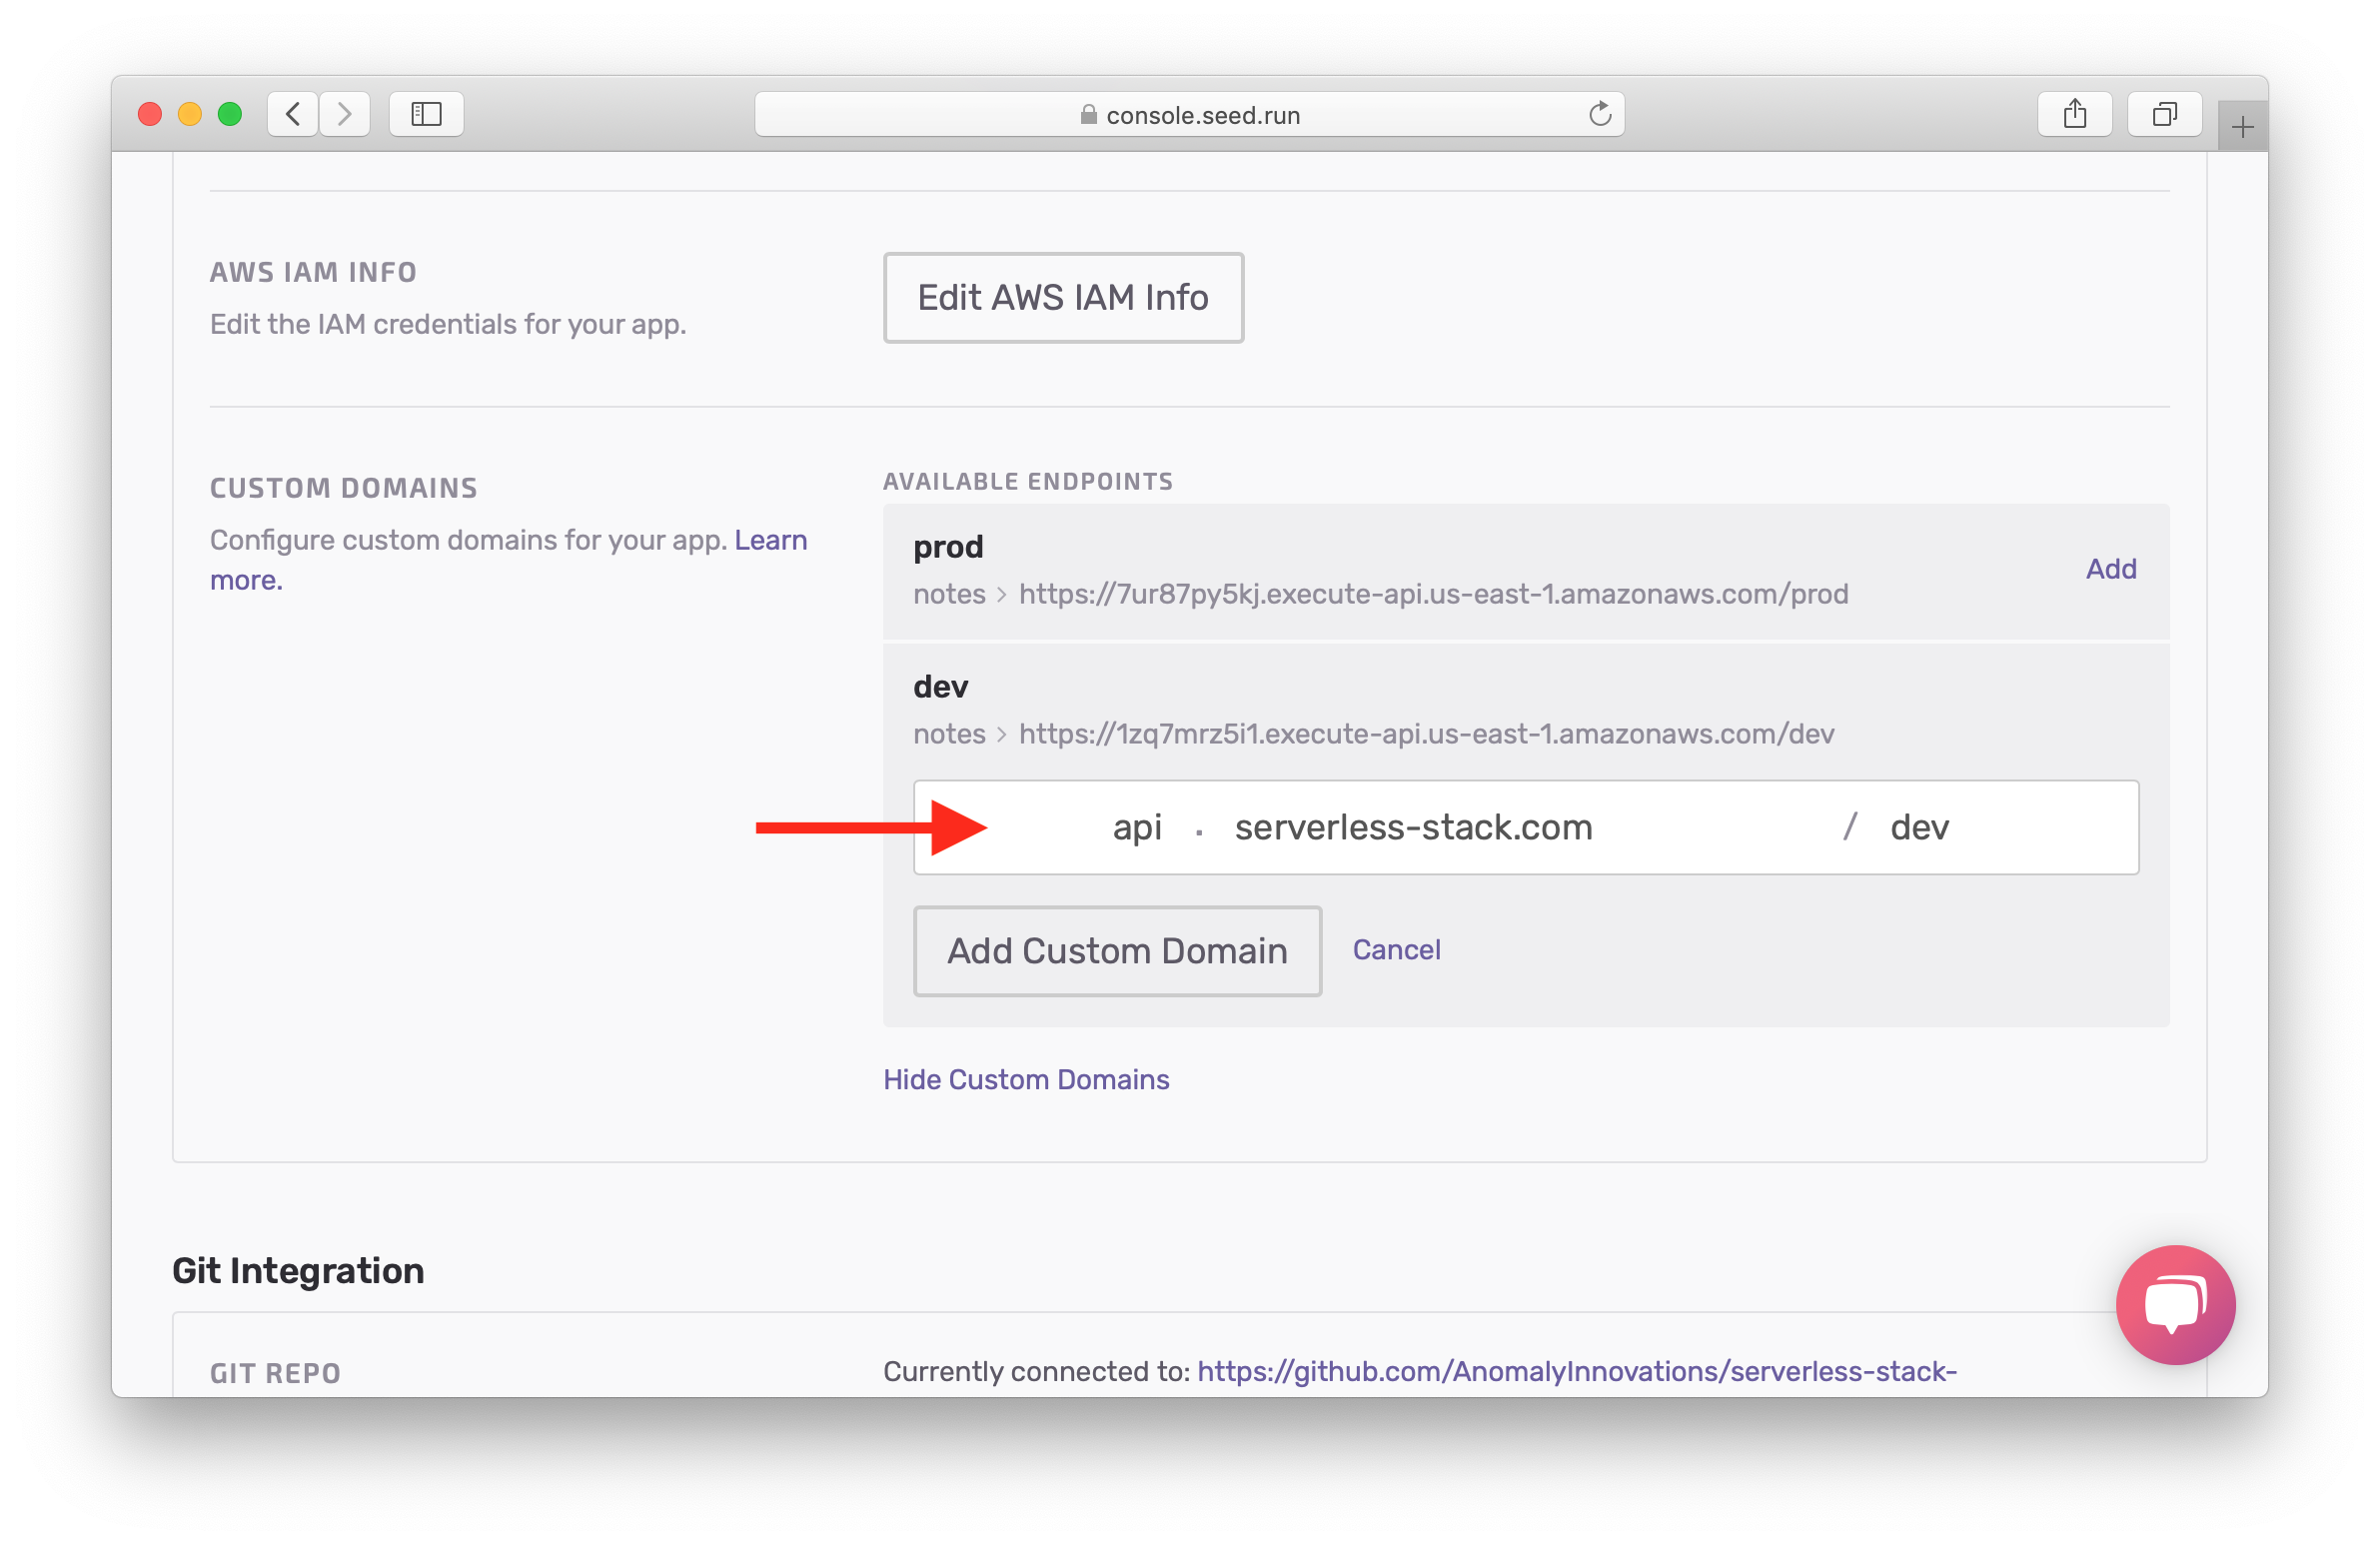 Click Add Custom Domain button for dev endpoint